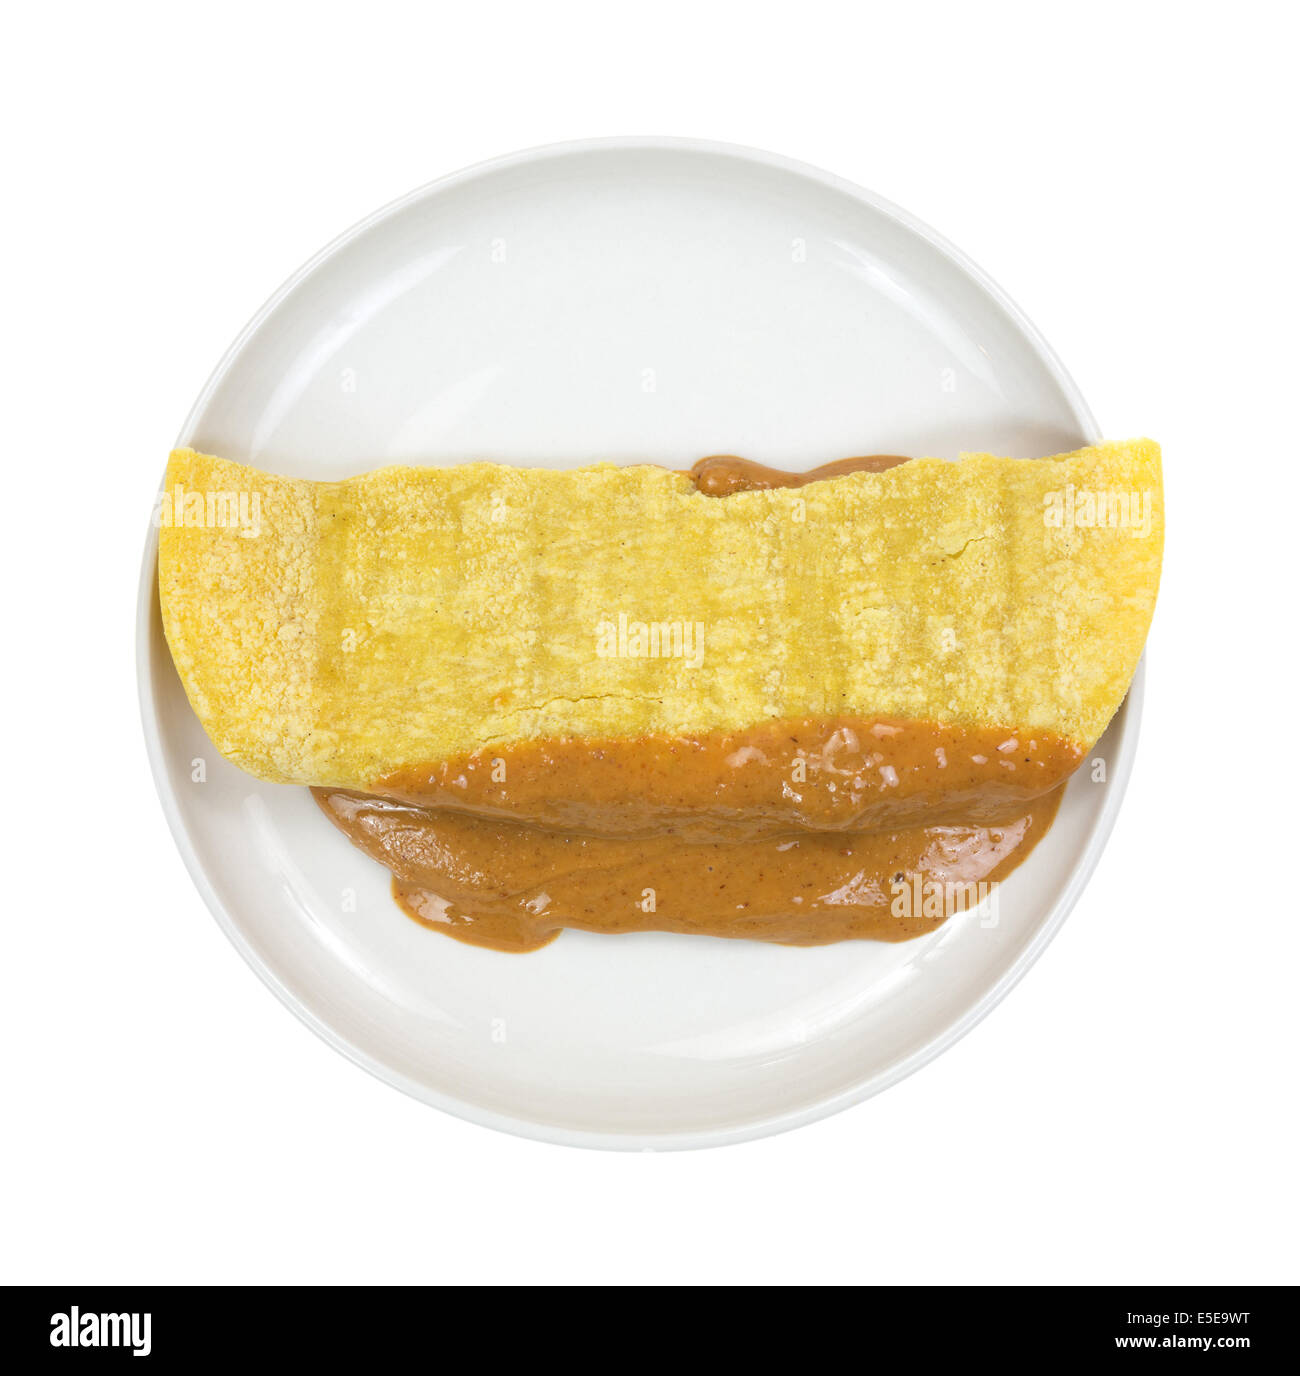 Top view of a small plate with a folded corn tortilla filled with peanut butter. Stock Photo